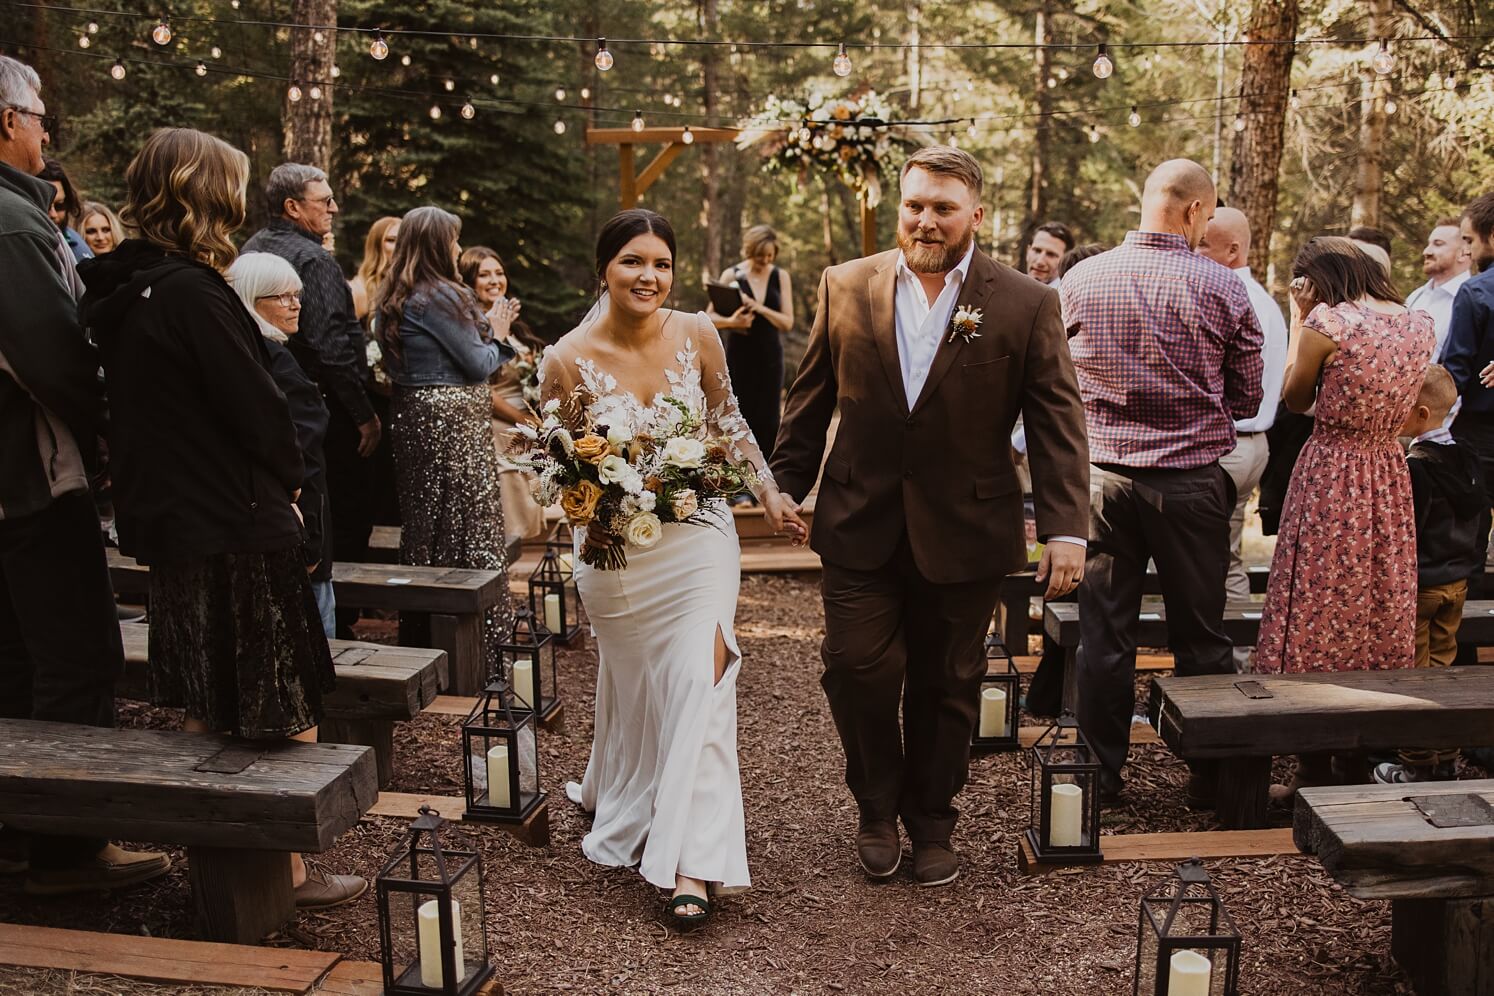 Bride and groom exiting ceremony at Evergreen wedding venue | McArthur Weddings and Events